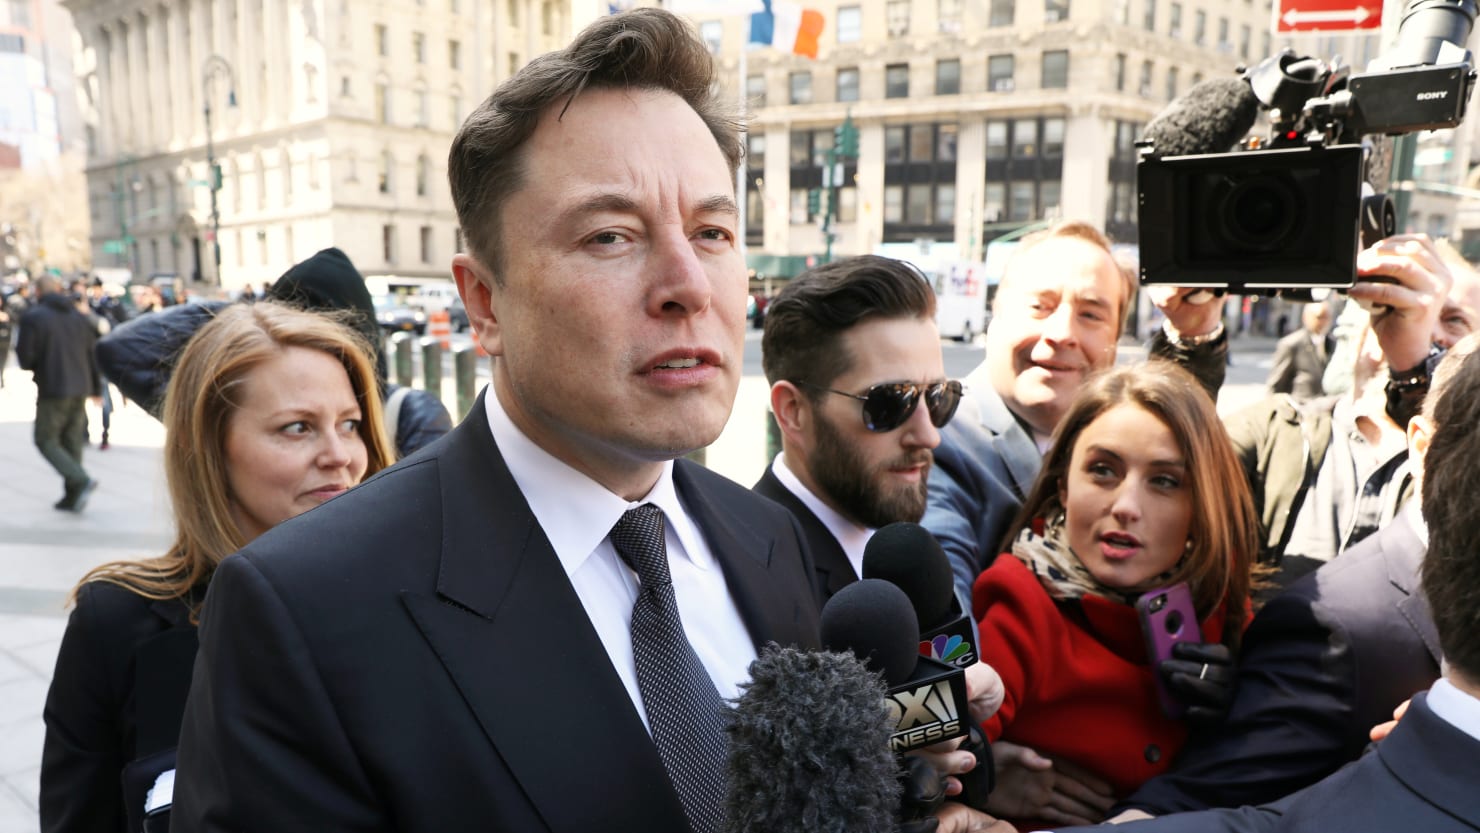 Elon Musk, cofounder of the artificial intelligence firm OpenAI, once again publicly griped about the startup’s direction on Wednesday, weeks after 